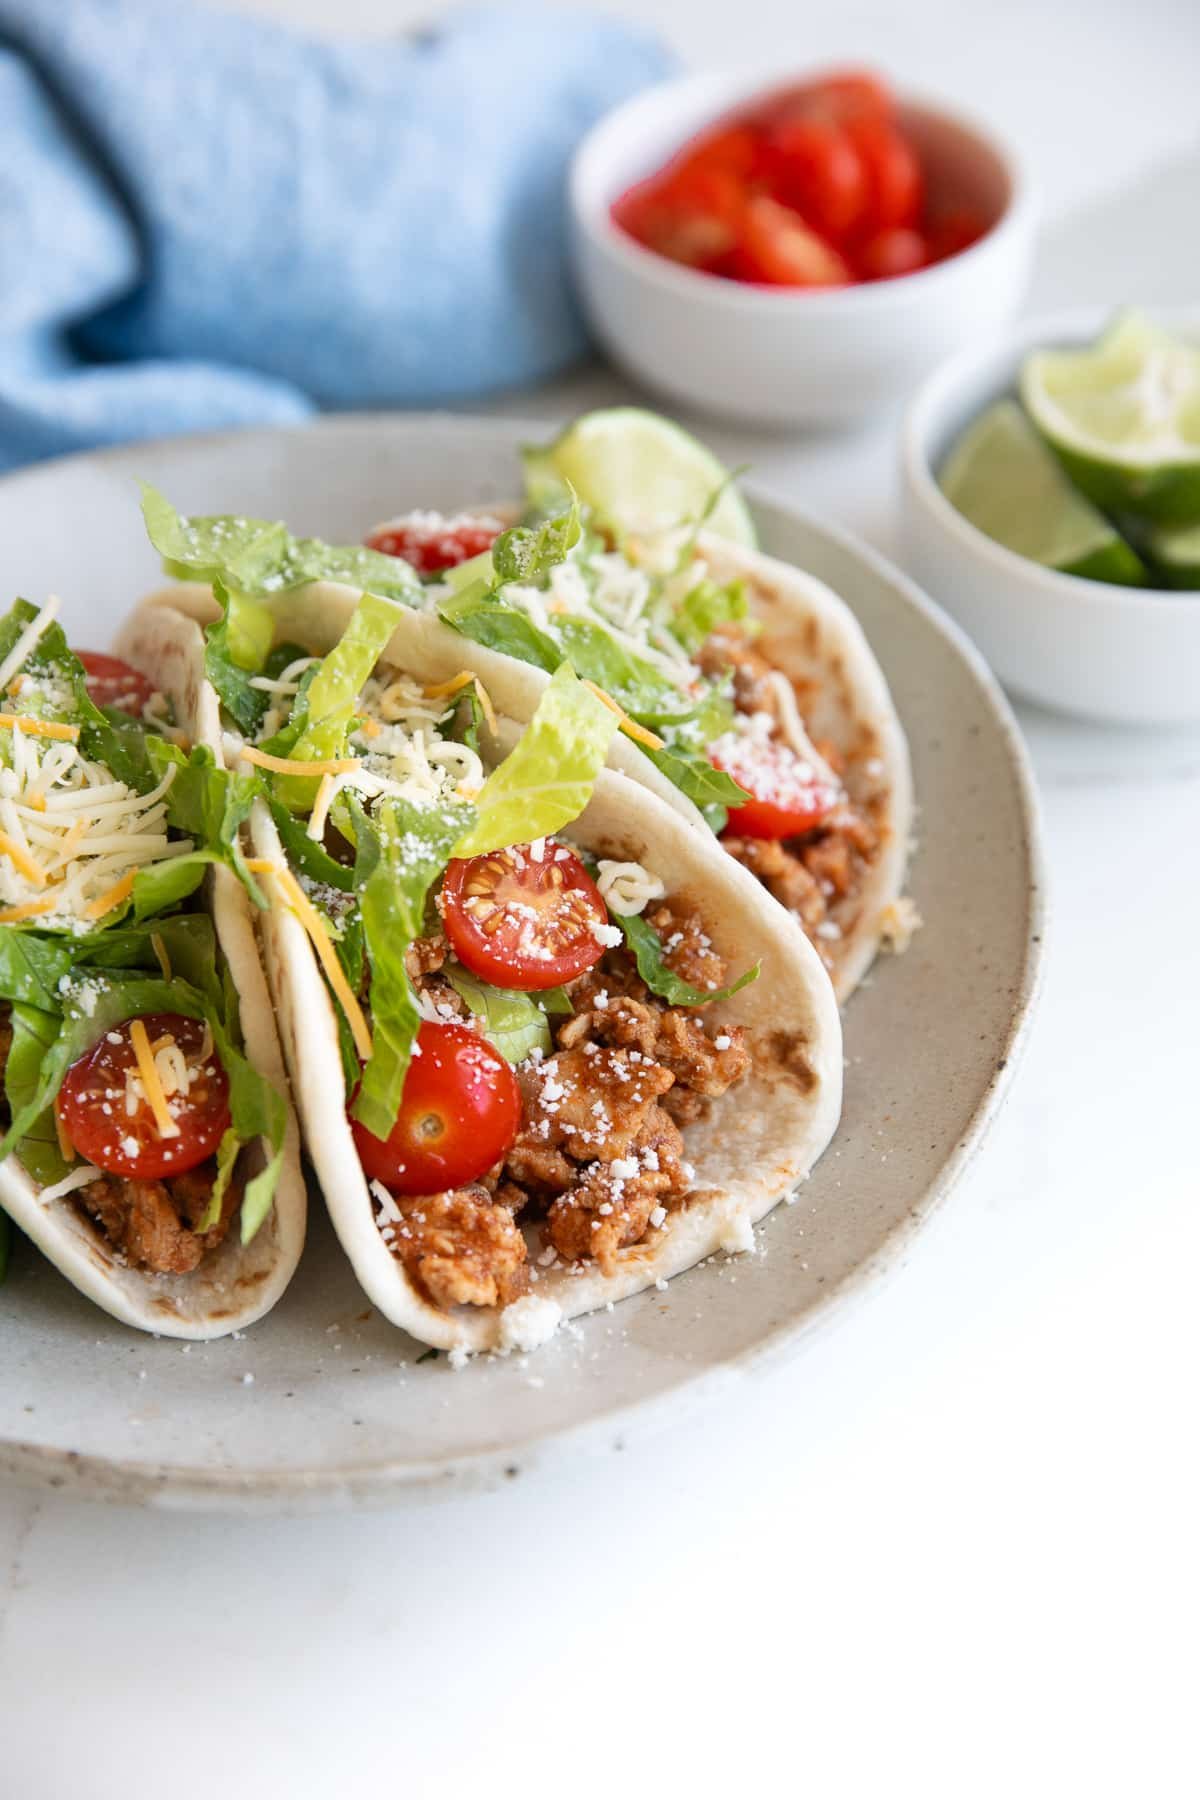 Three ground turkey tacos filled with ground turkey taco meat and topped with tomatoes, lettuce, and cheese, on a small serving plate.